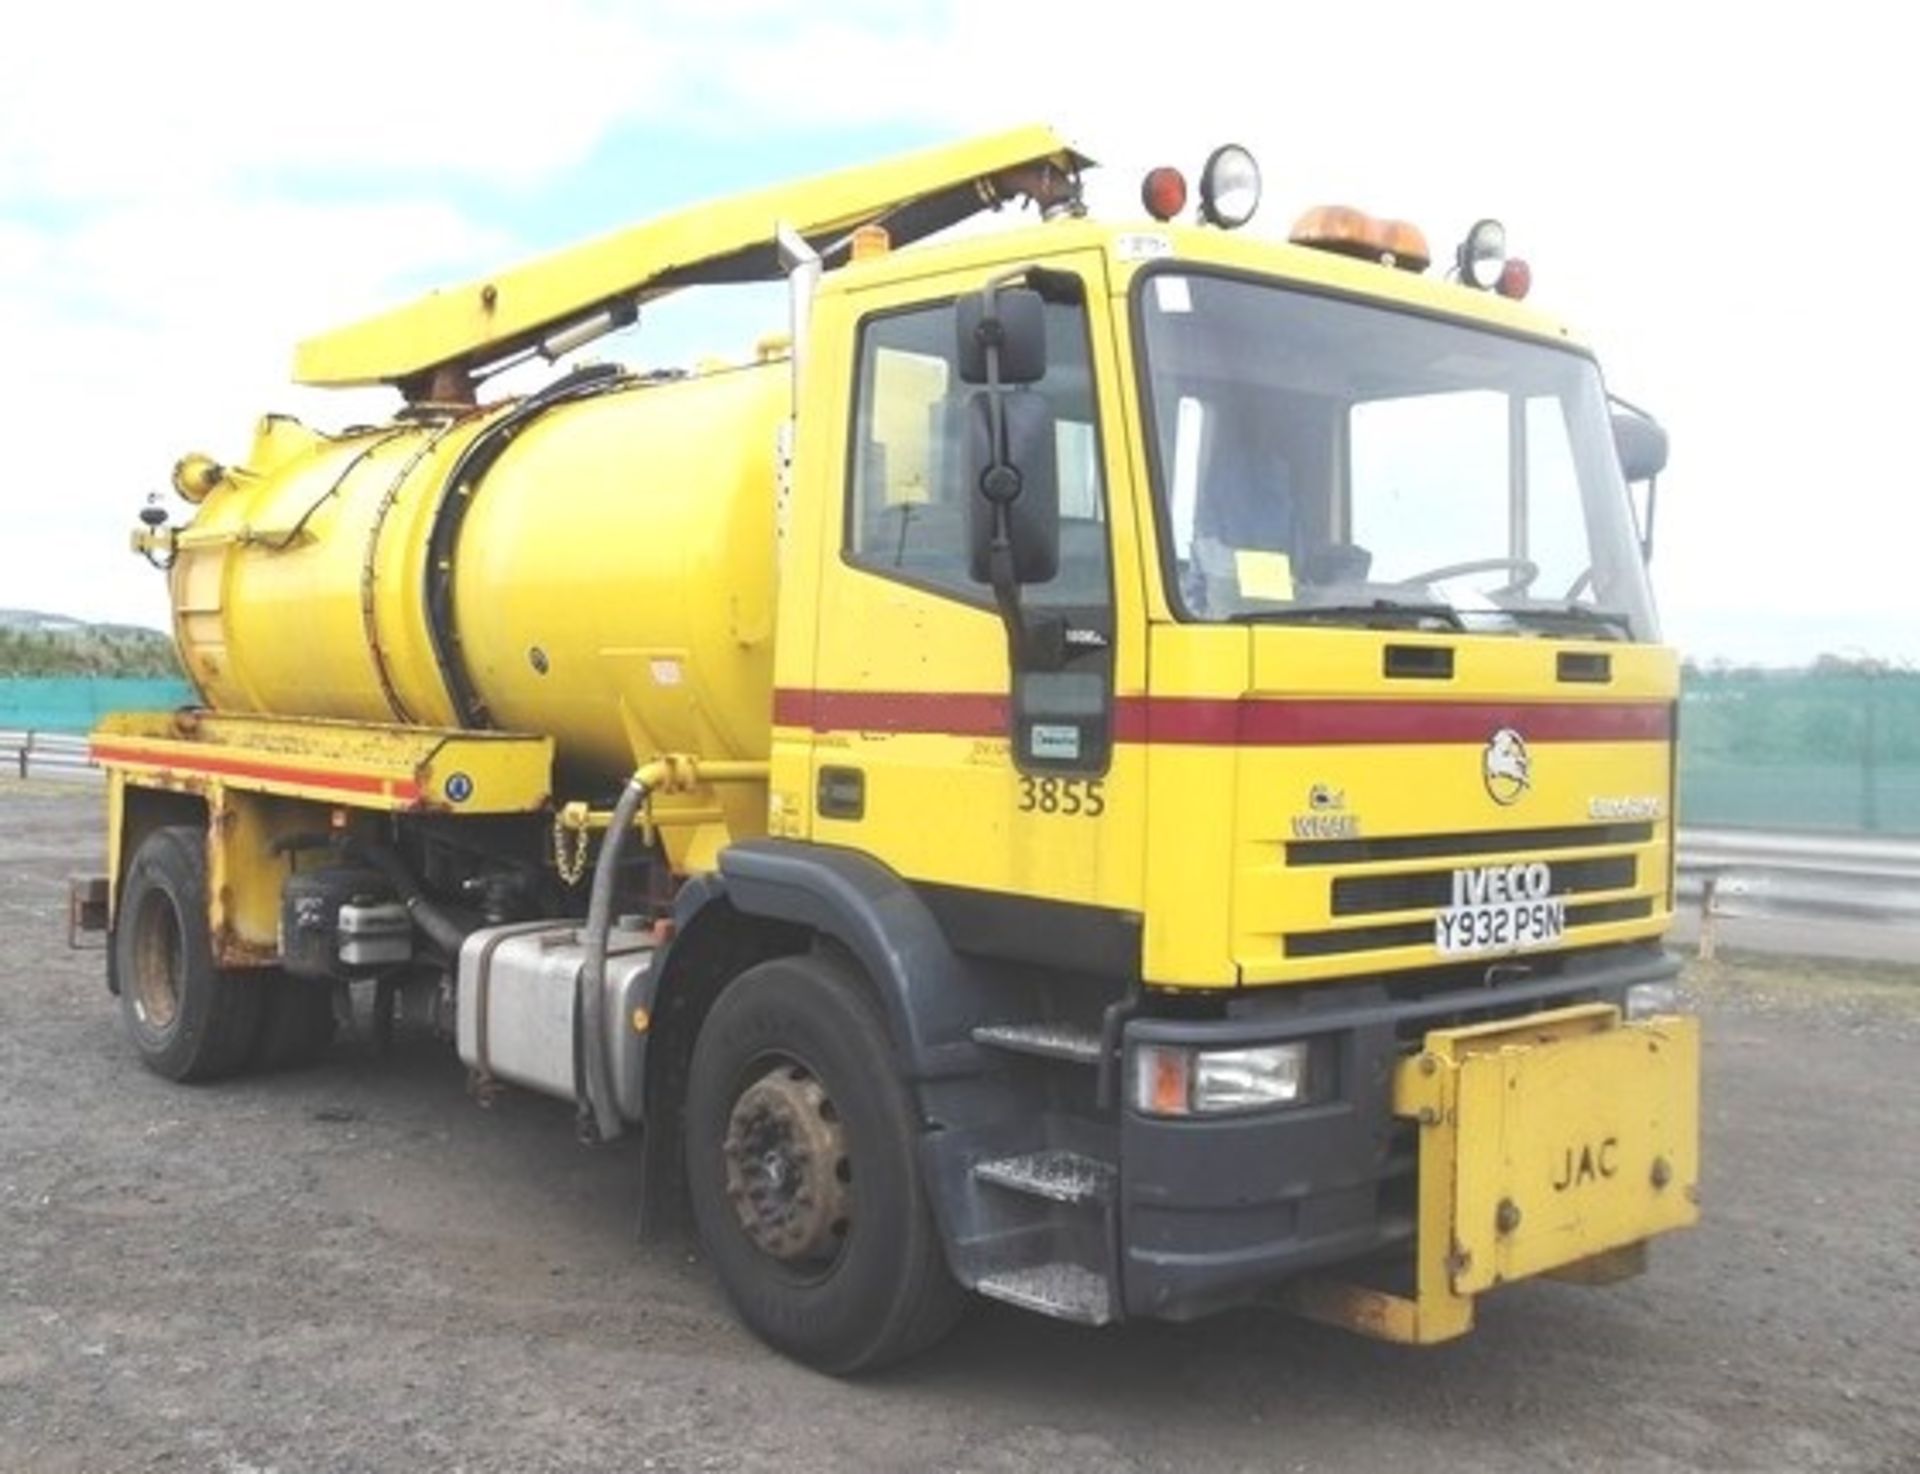 IVECO-FORD SUPERCARGO - 5861cc
Body: 2 Dr Truck
Color: Yellow
First Reg: 24/05/2001
Doors: 2
MOT: - Image 7 of 13